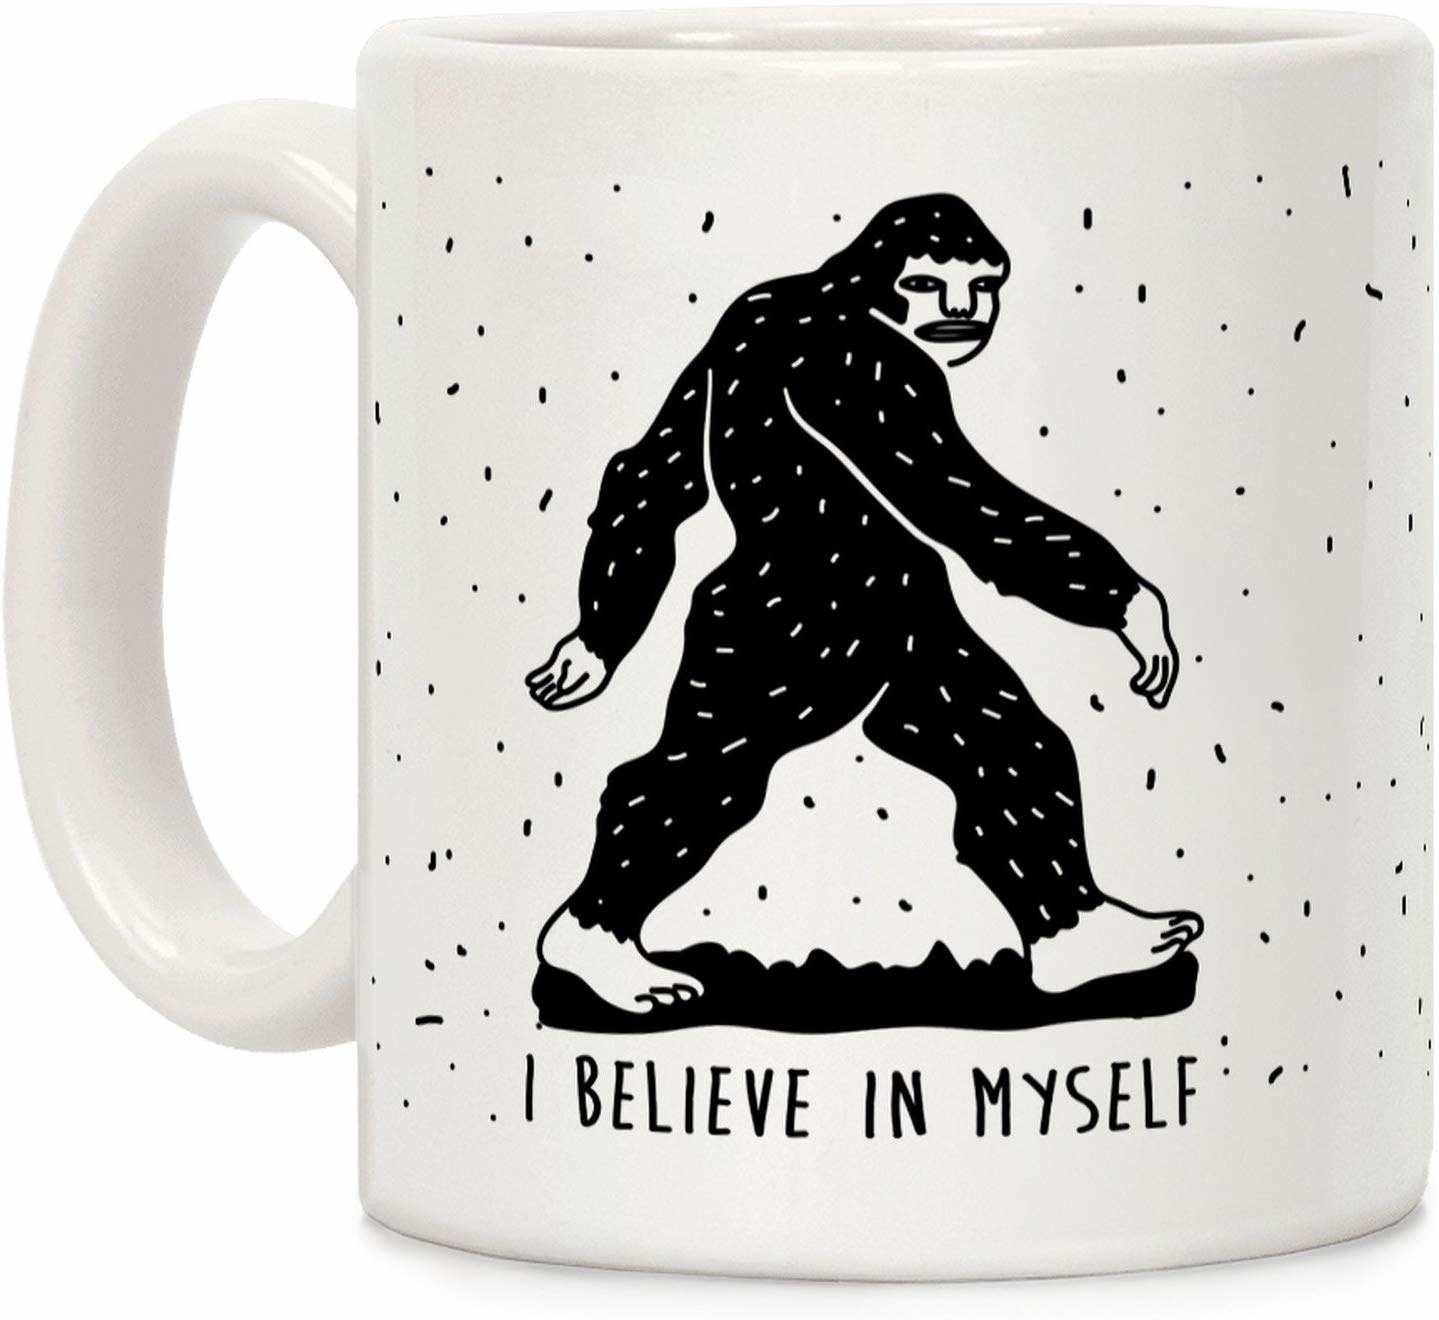 Details about   I Don’t Need Therapy I Need To Find Bigfoot Blanket Gift Printed in US 50x60x80 